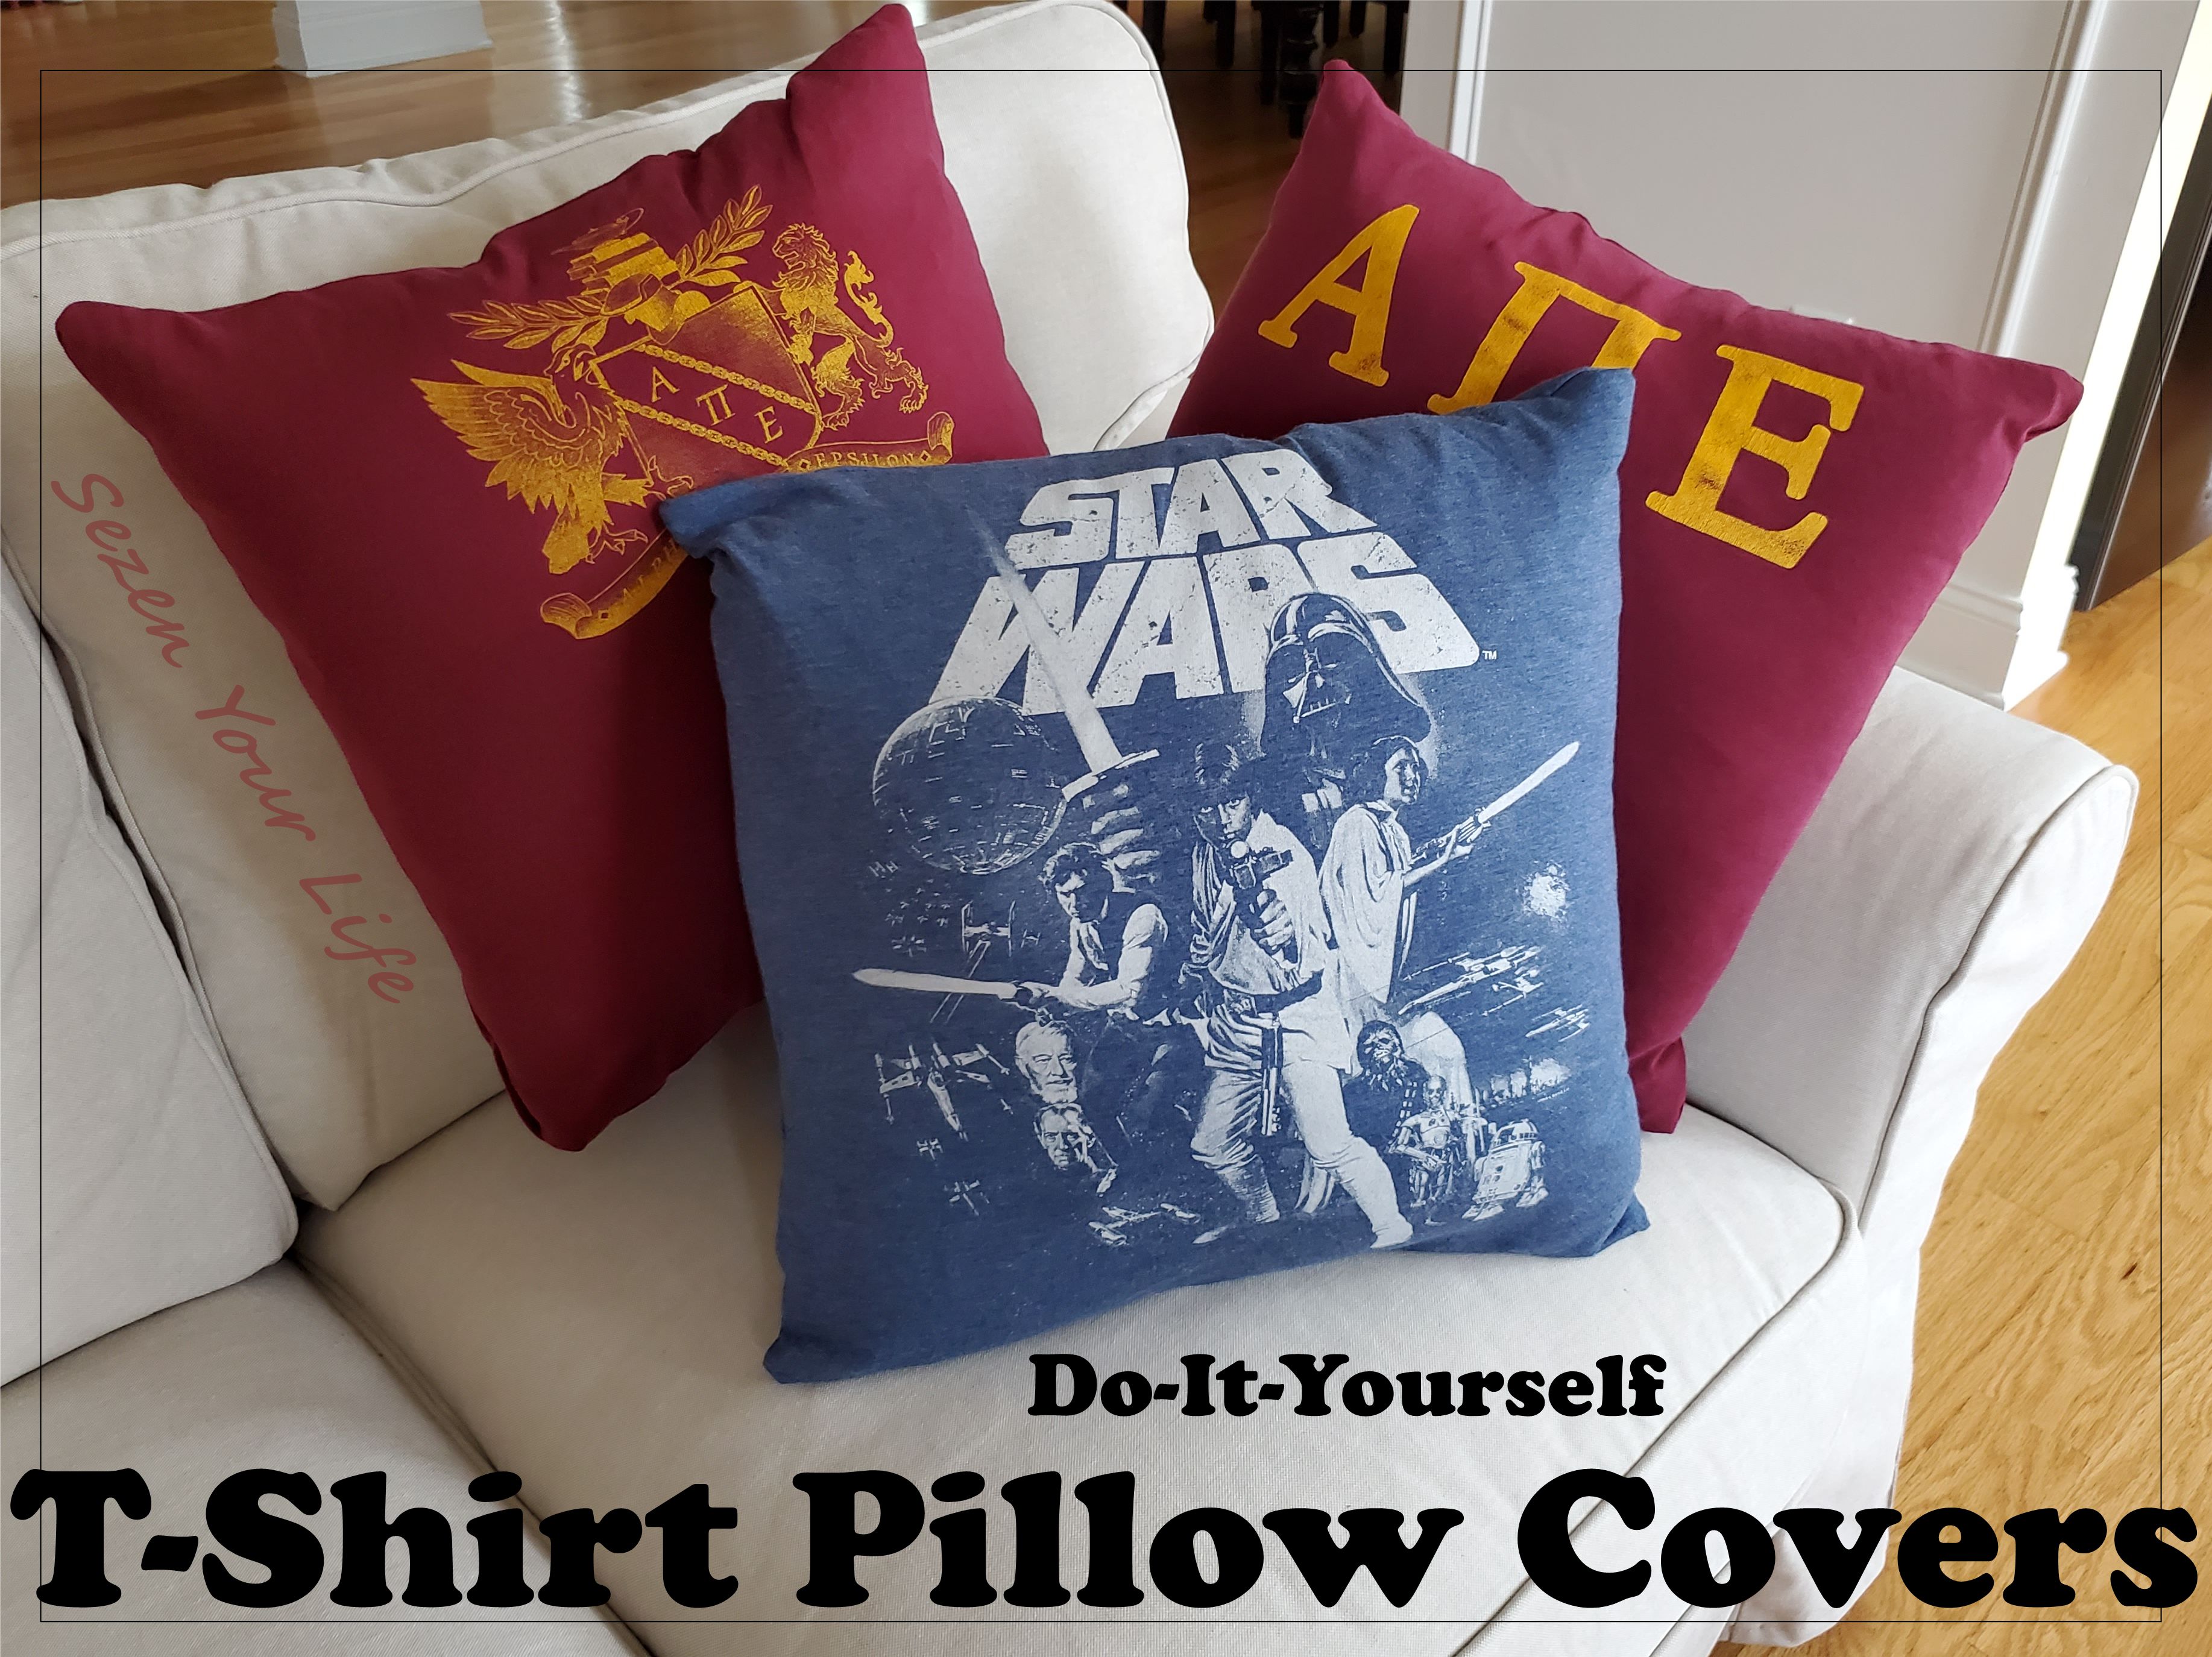 making pillows out of old shirts